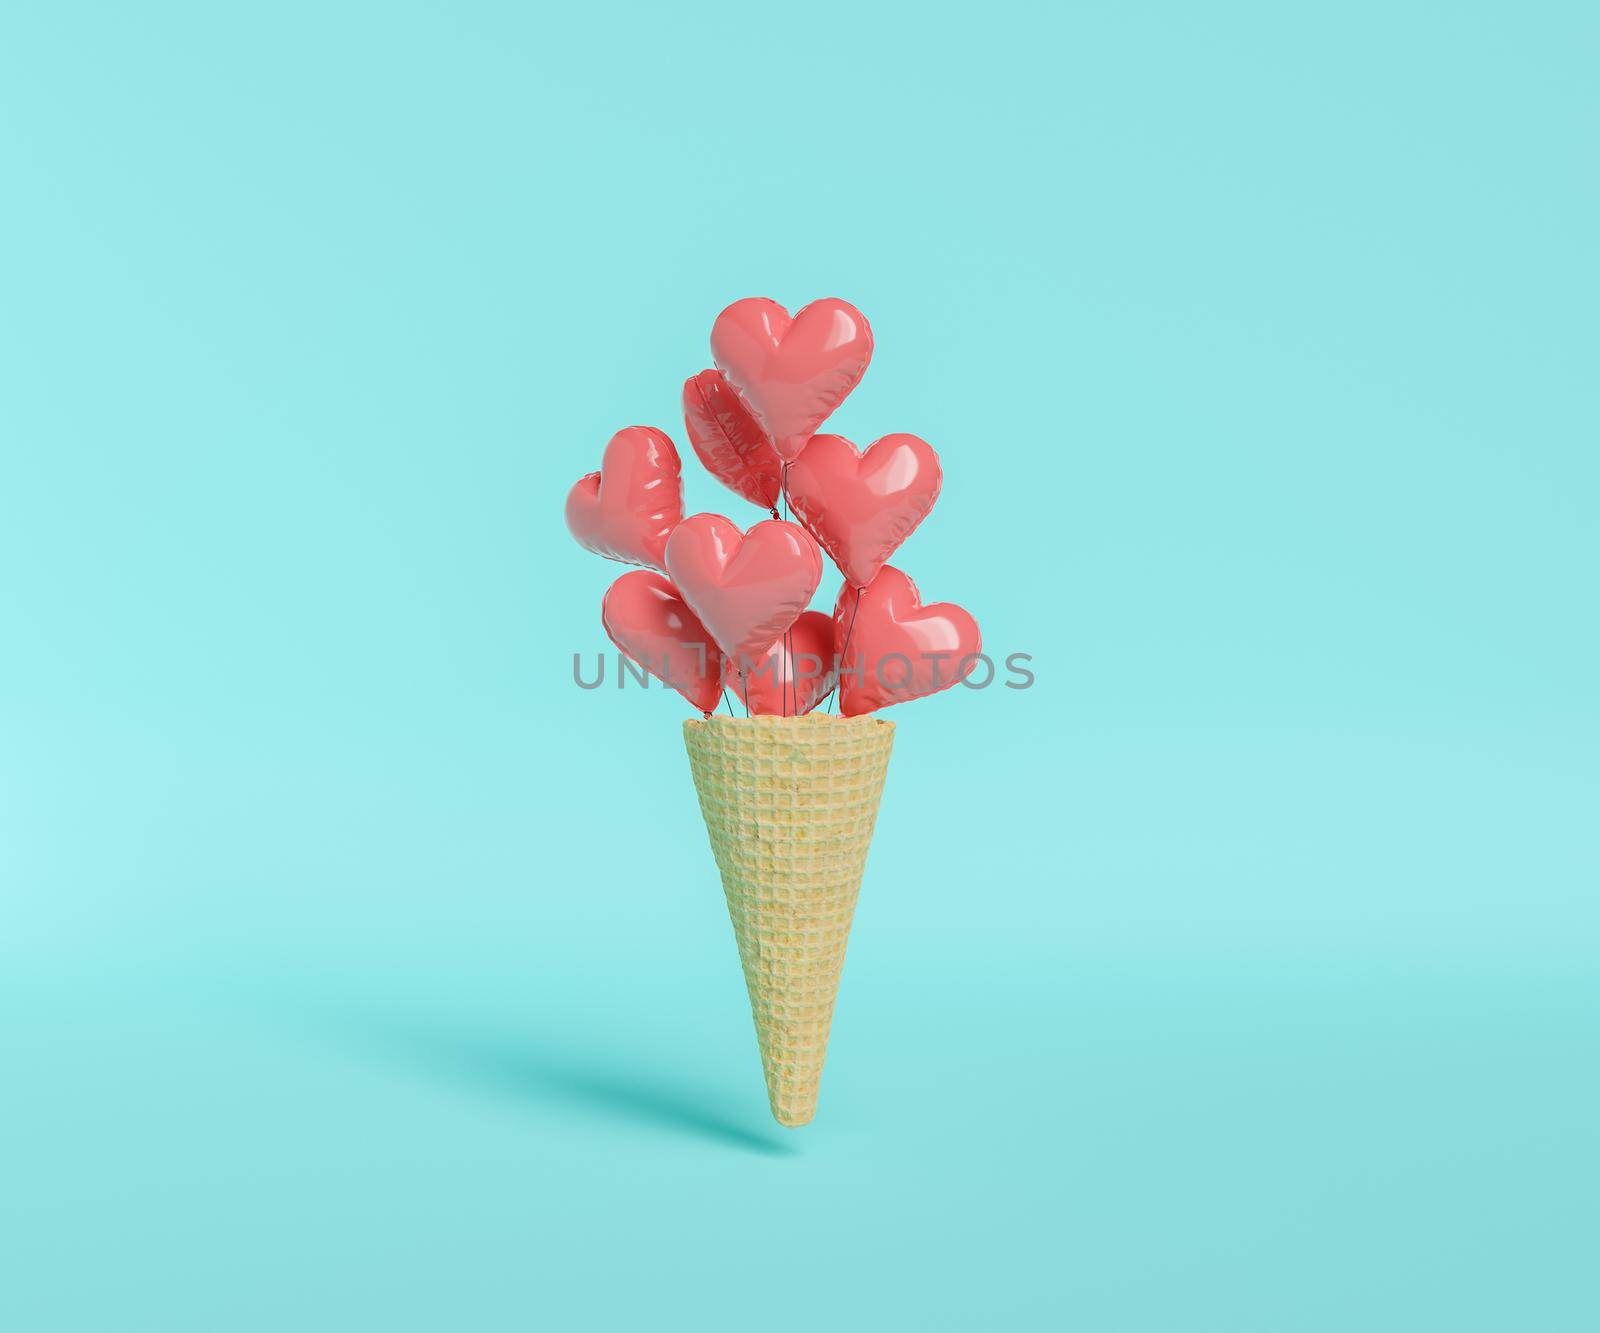 cookie ice cream cone with heart balloons coming out of it. 3d rendering